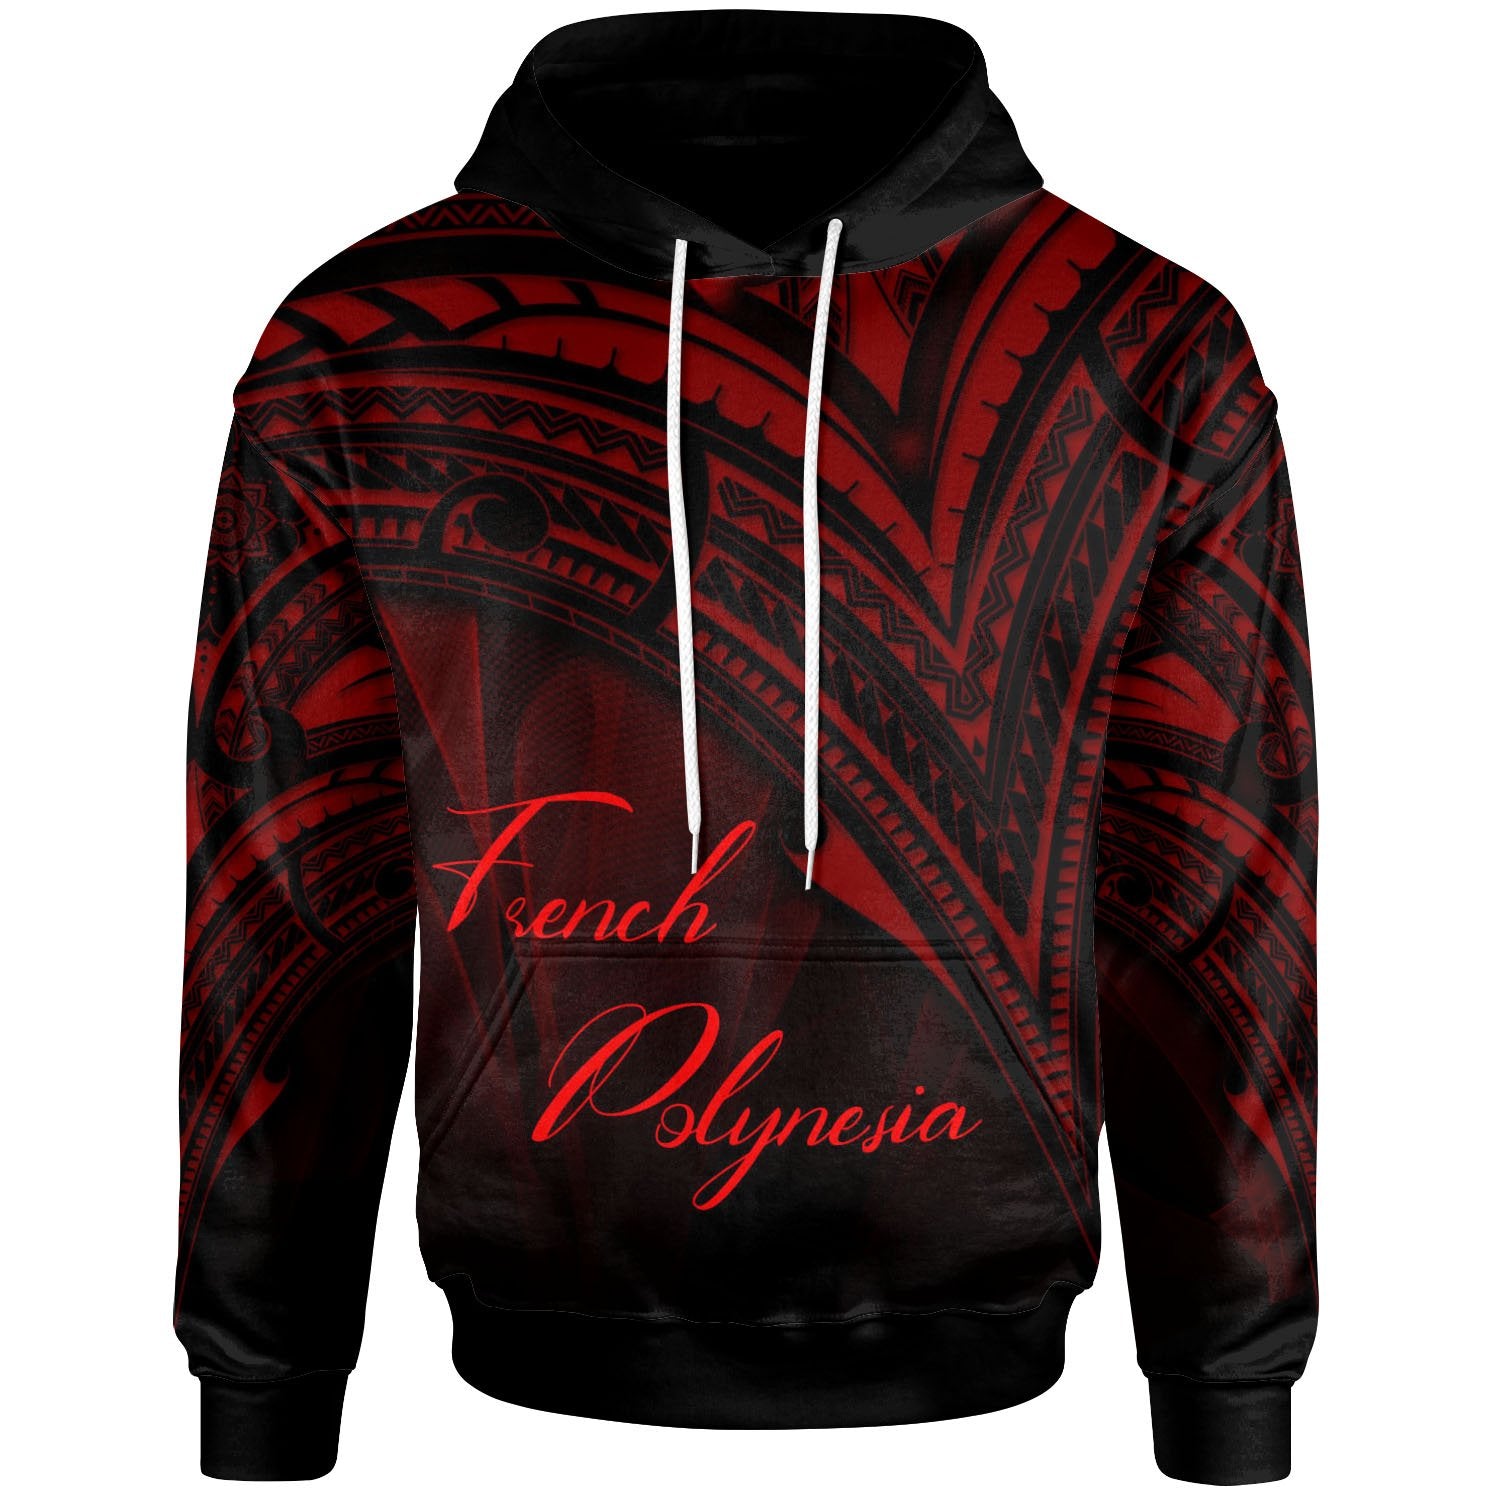 French Polynesia Hoodie Red Color Cross Style Unisex Black - Polynesian Pride